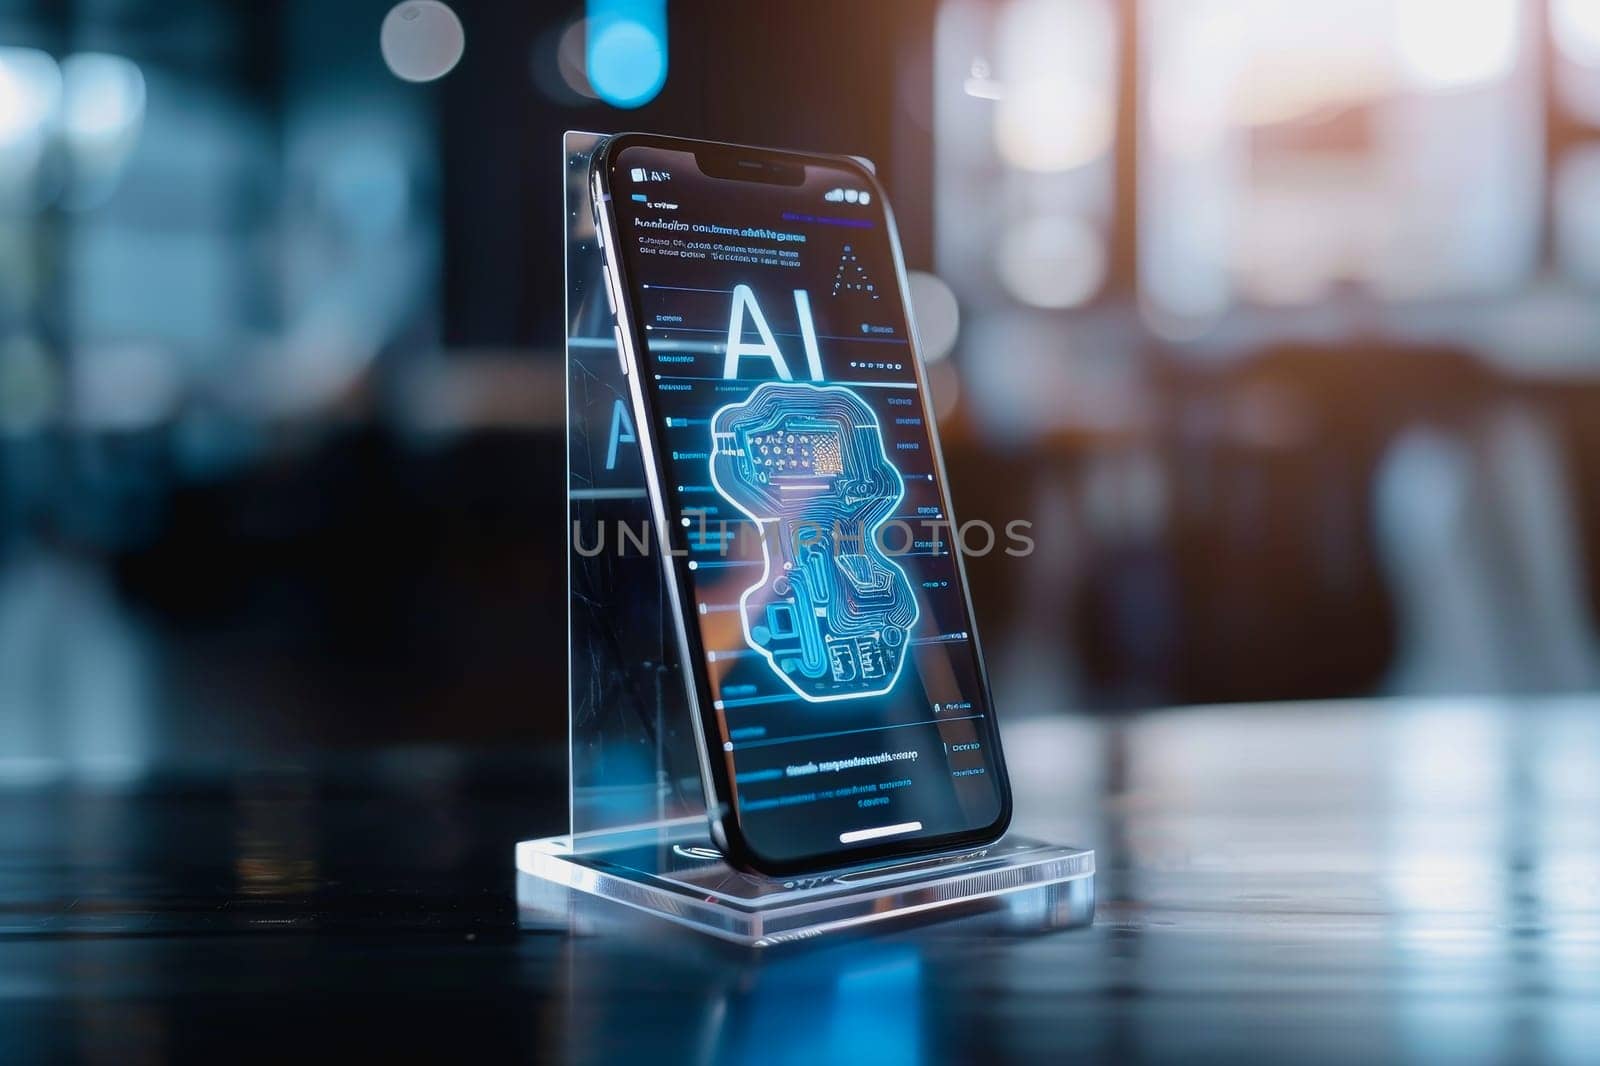 ransparent smartphone display on with AI text to the screen for futuristic technology concepts by Manastrong